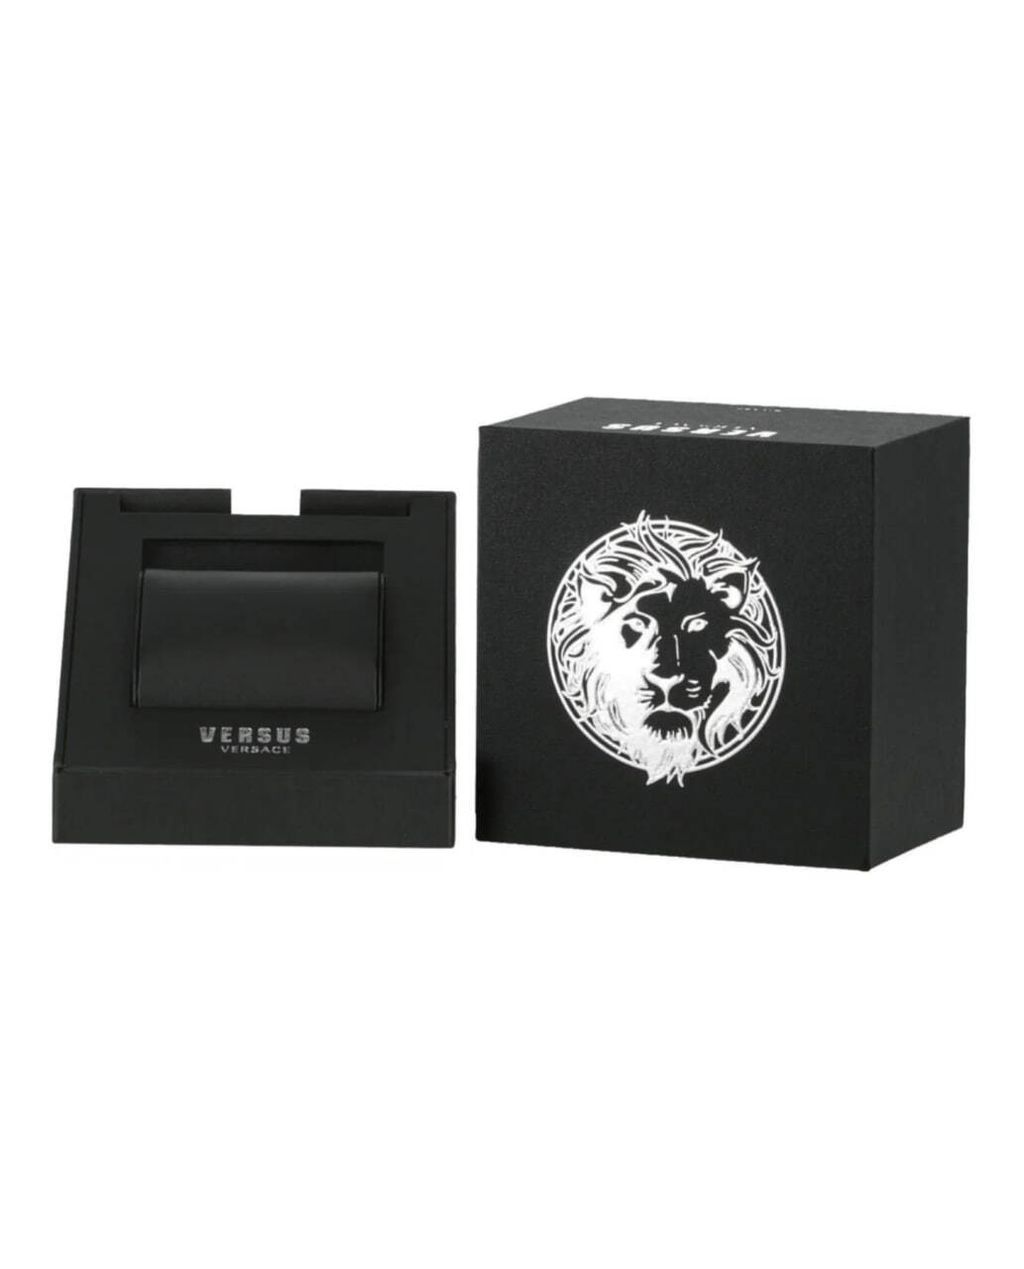 handbagbranded.com getlush outlet personalshopper usa malaysia ready stock VERSUS VERSACE Victoria Harbour Cry Bracelet Watch 3